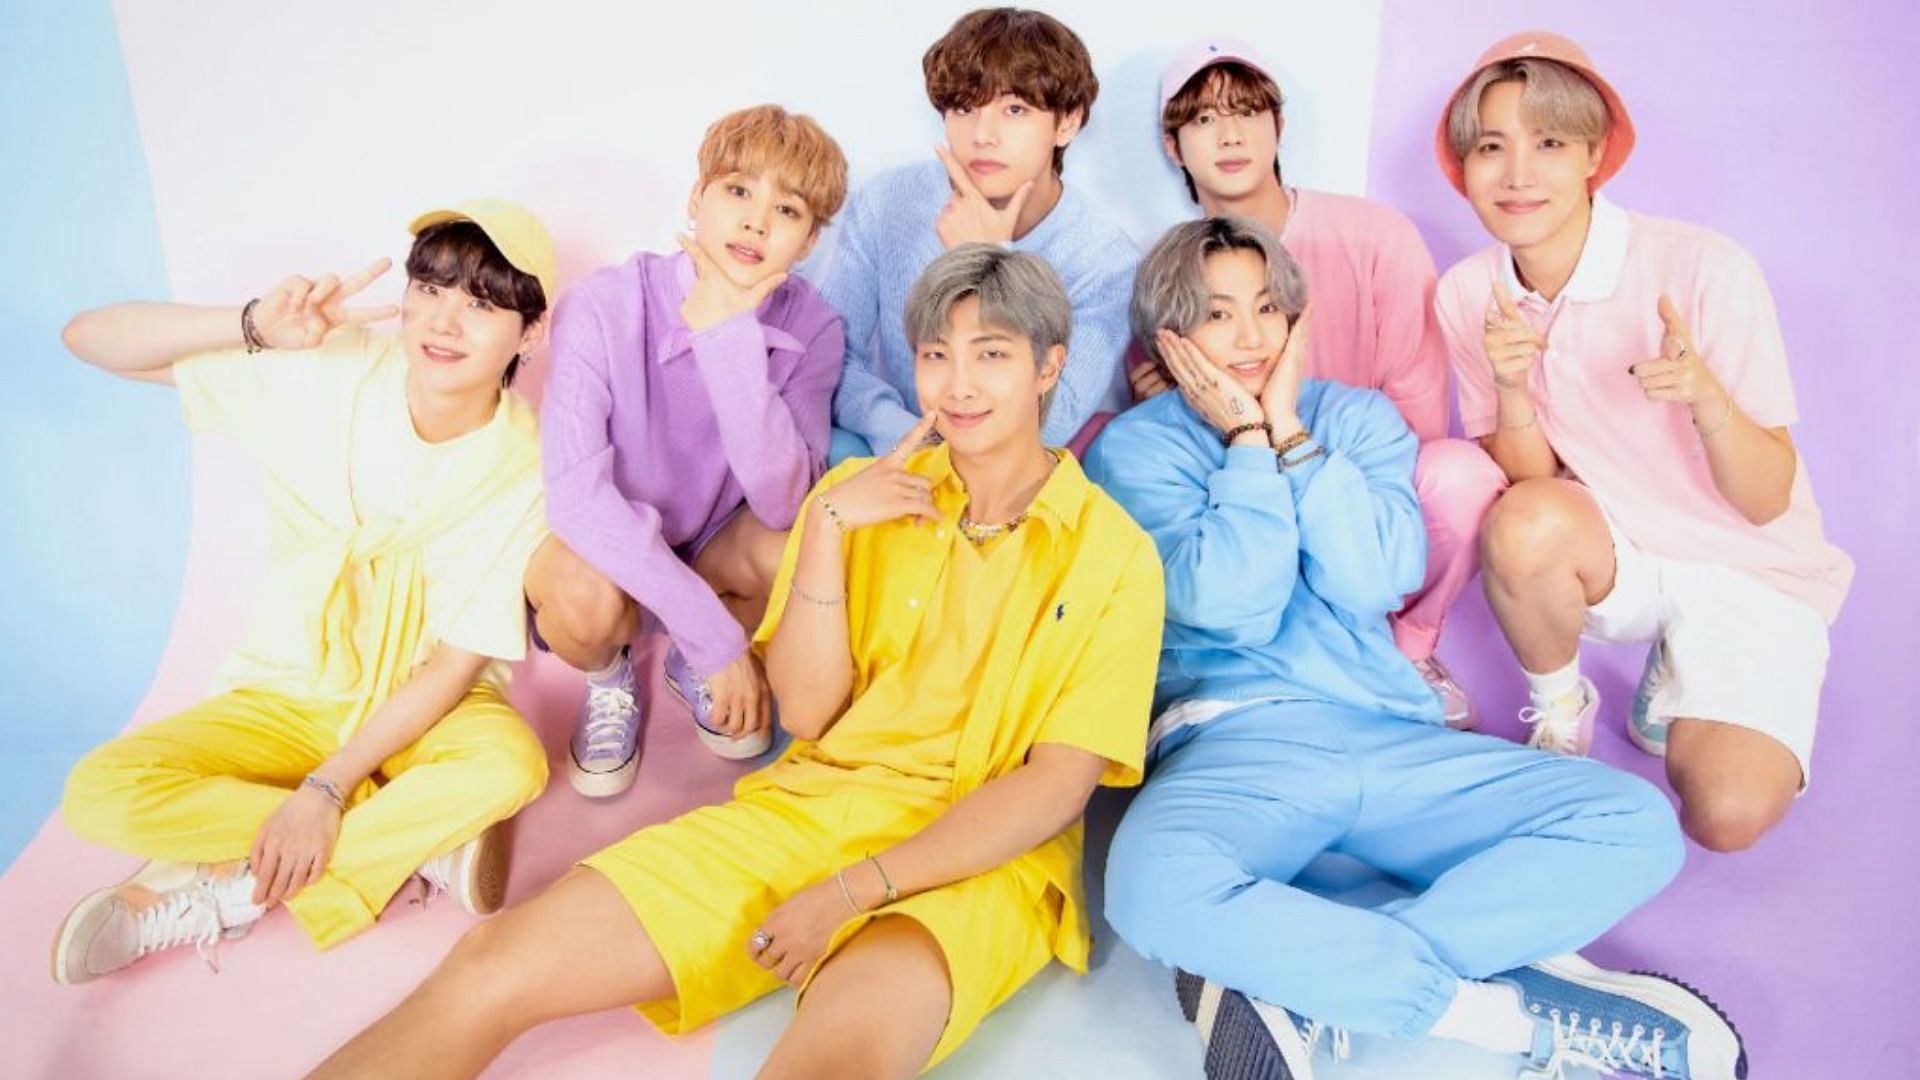 BTS Festa 2022 Schedule, new song, and more